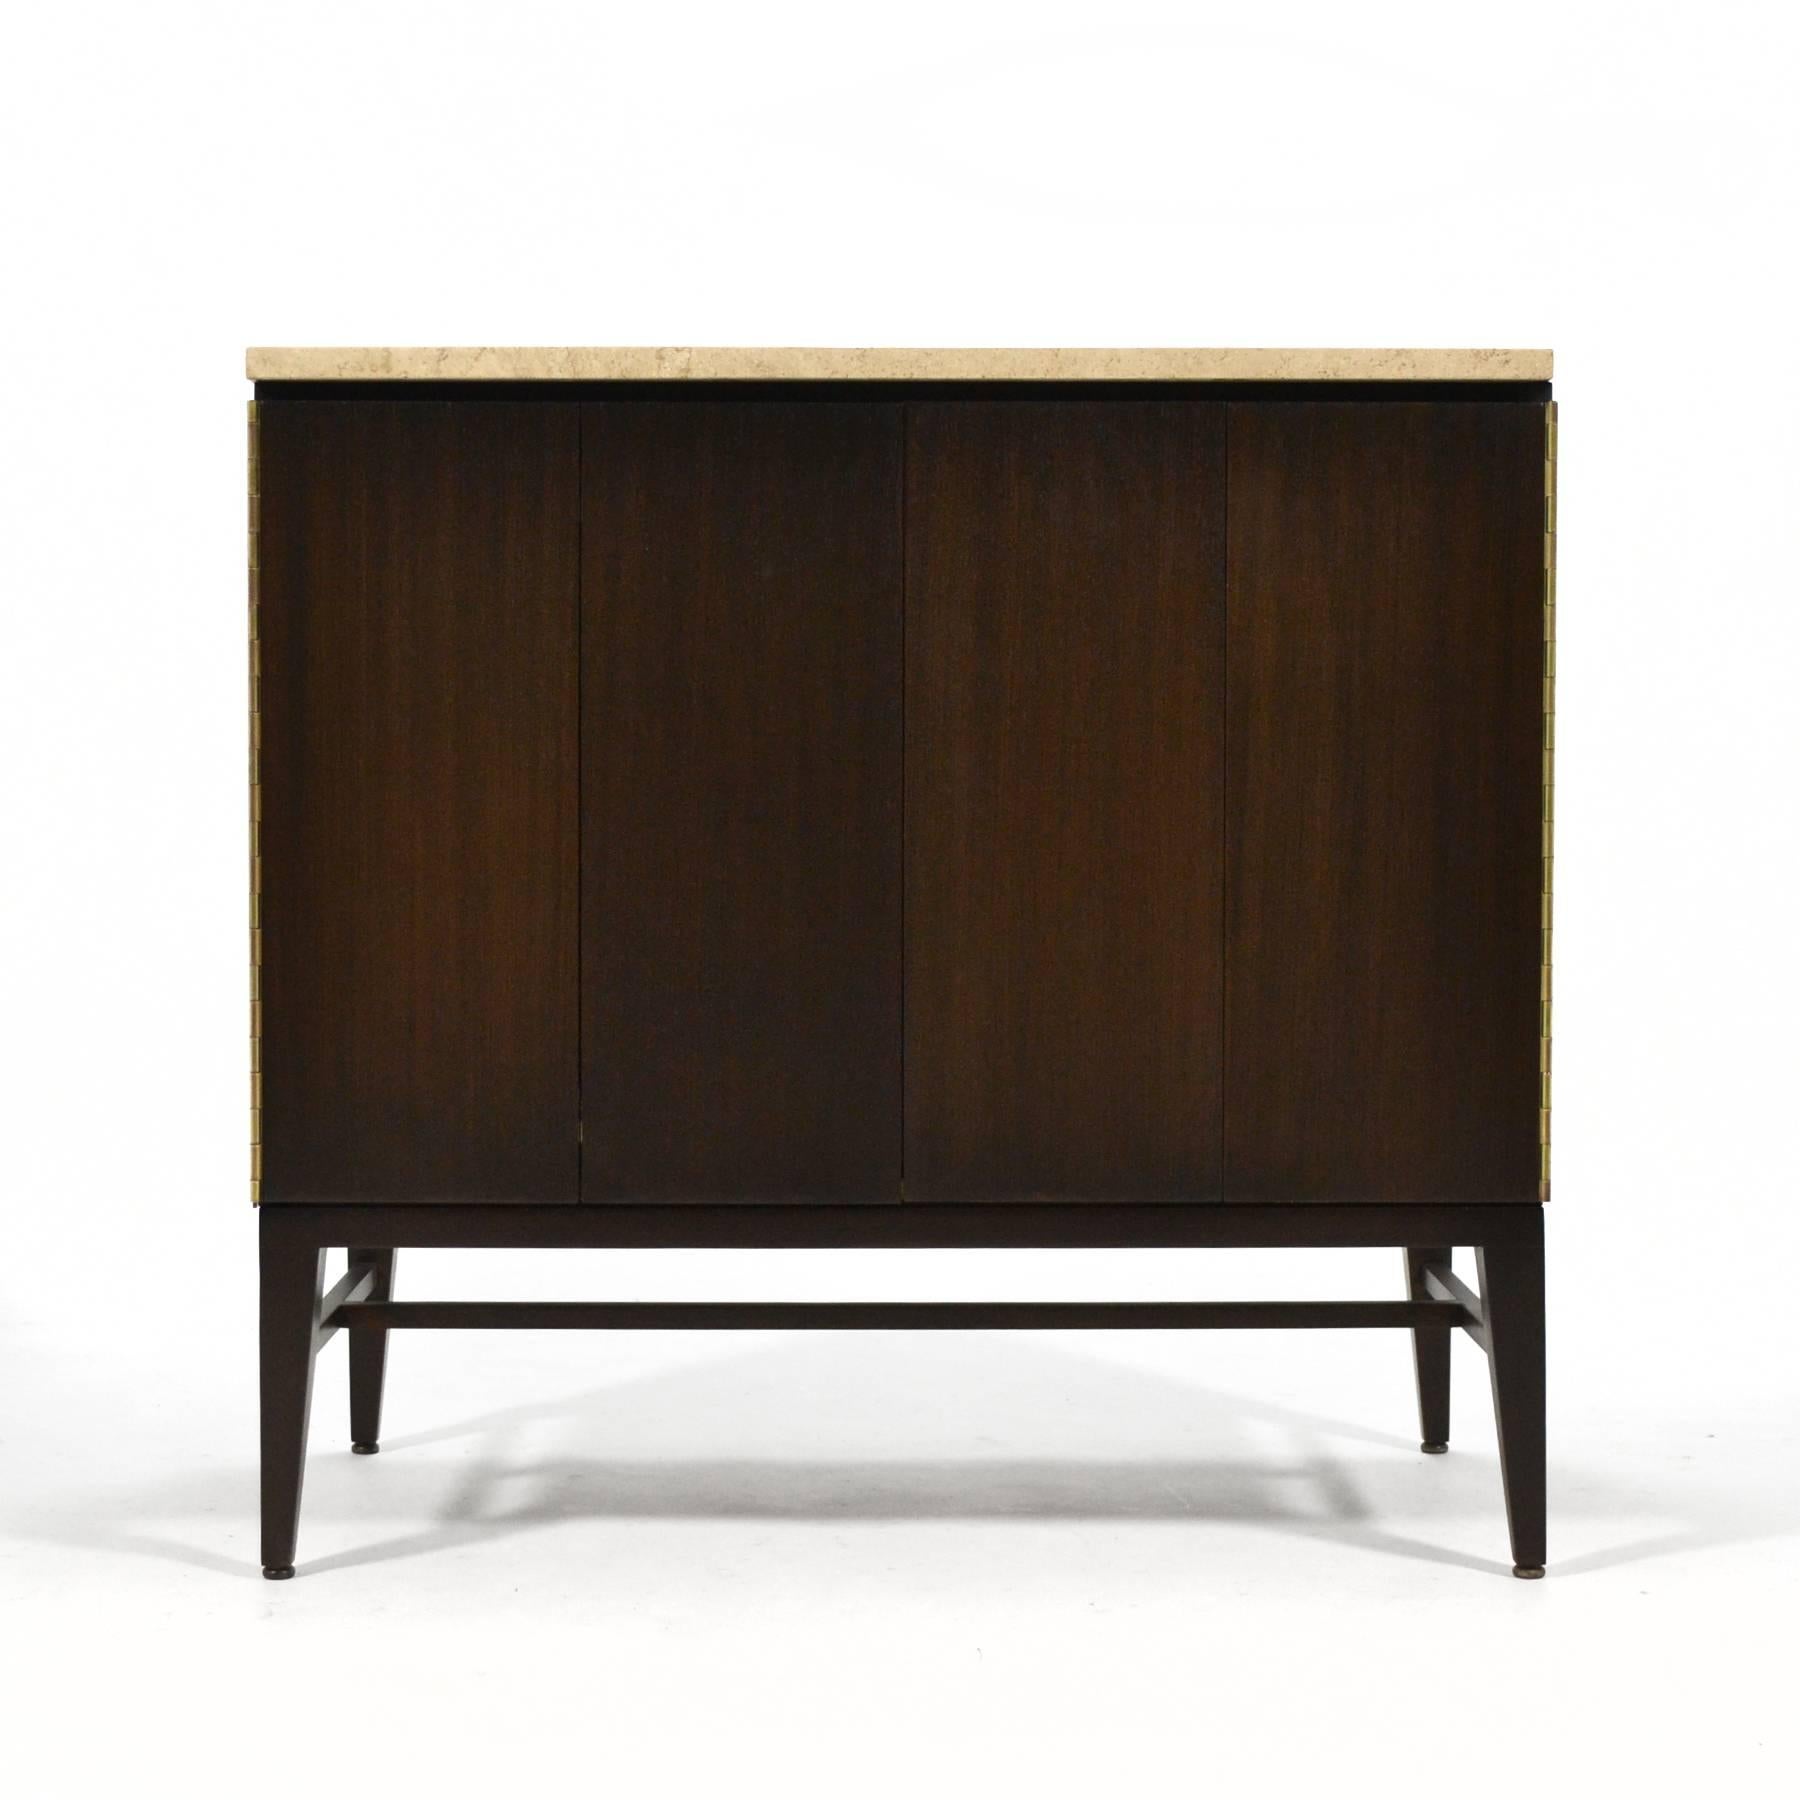 Mid-20th Century Paul McCobb Cabinets or Credenzas with Travertine Tops by Calvin